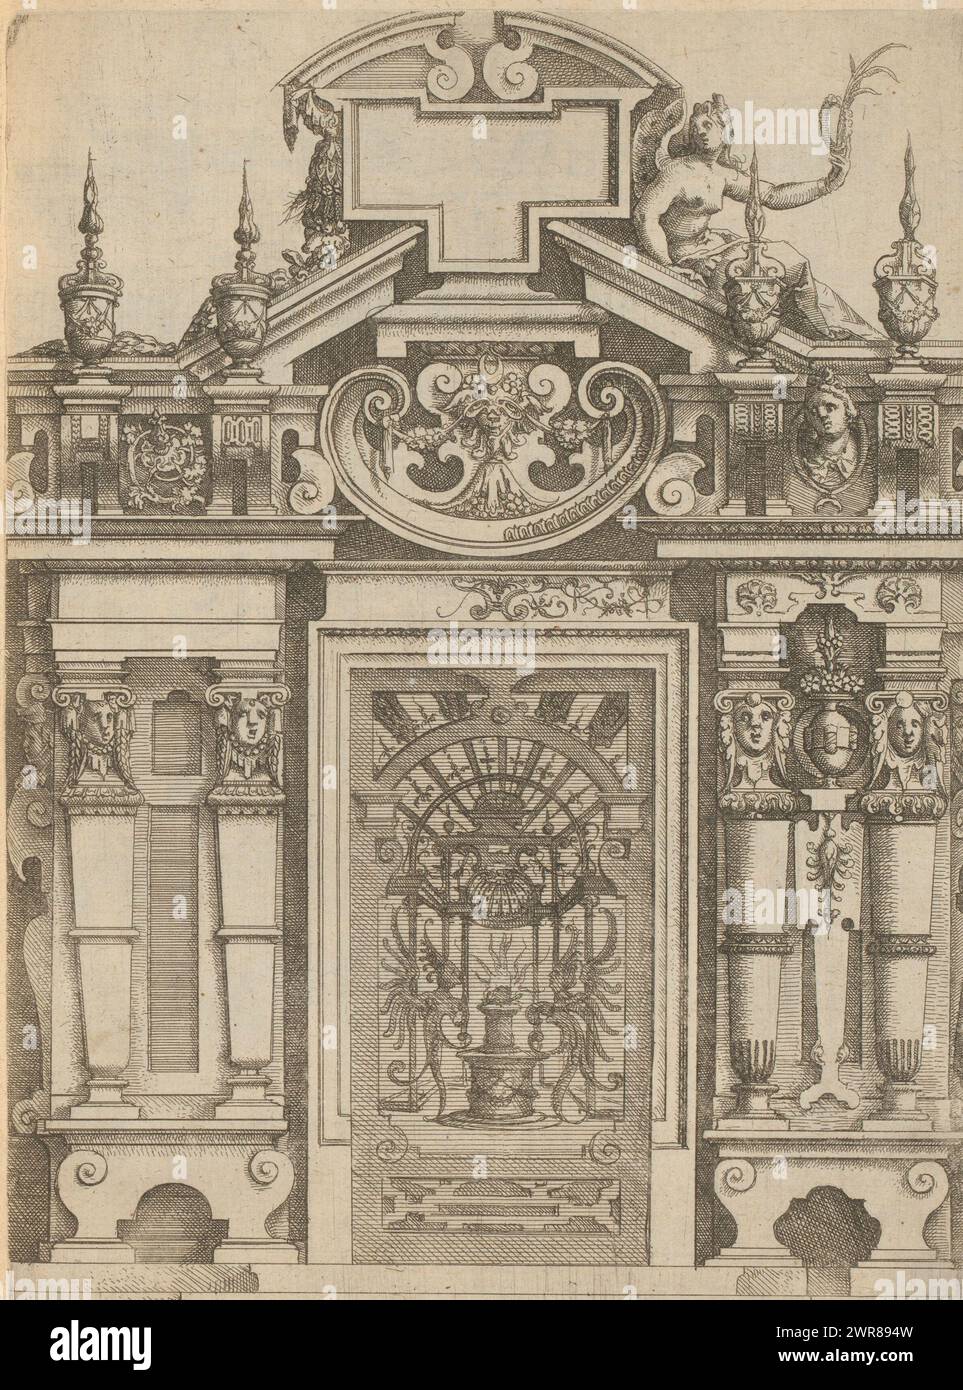 Portal decorated with garlands and mascarons, Architectura (series title), Numbered: 32. Print is part of a book., print maker: Wendel Dietterlin (I), publisher: Bernhard Jobin, Straatsburg (Frankrijk), 1593 - 1595, paper, etching, height 248 mm × width 186 mm Stock Photo